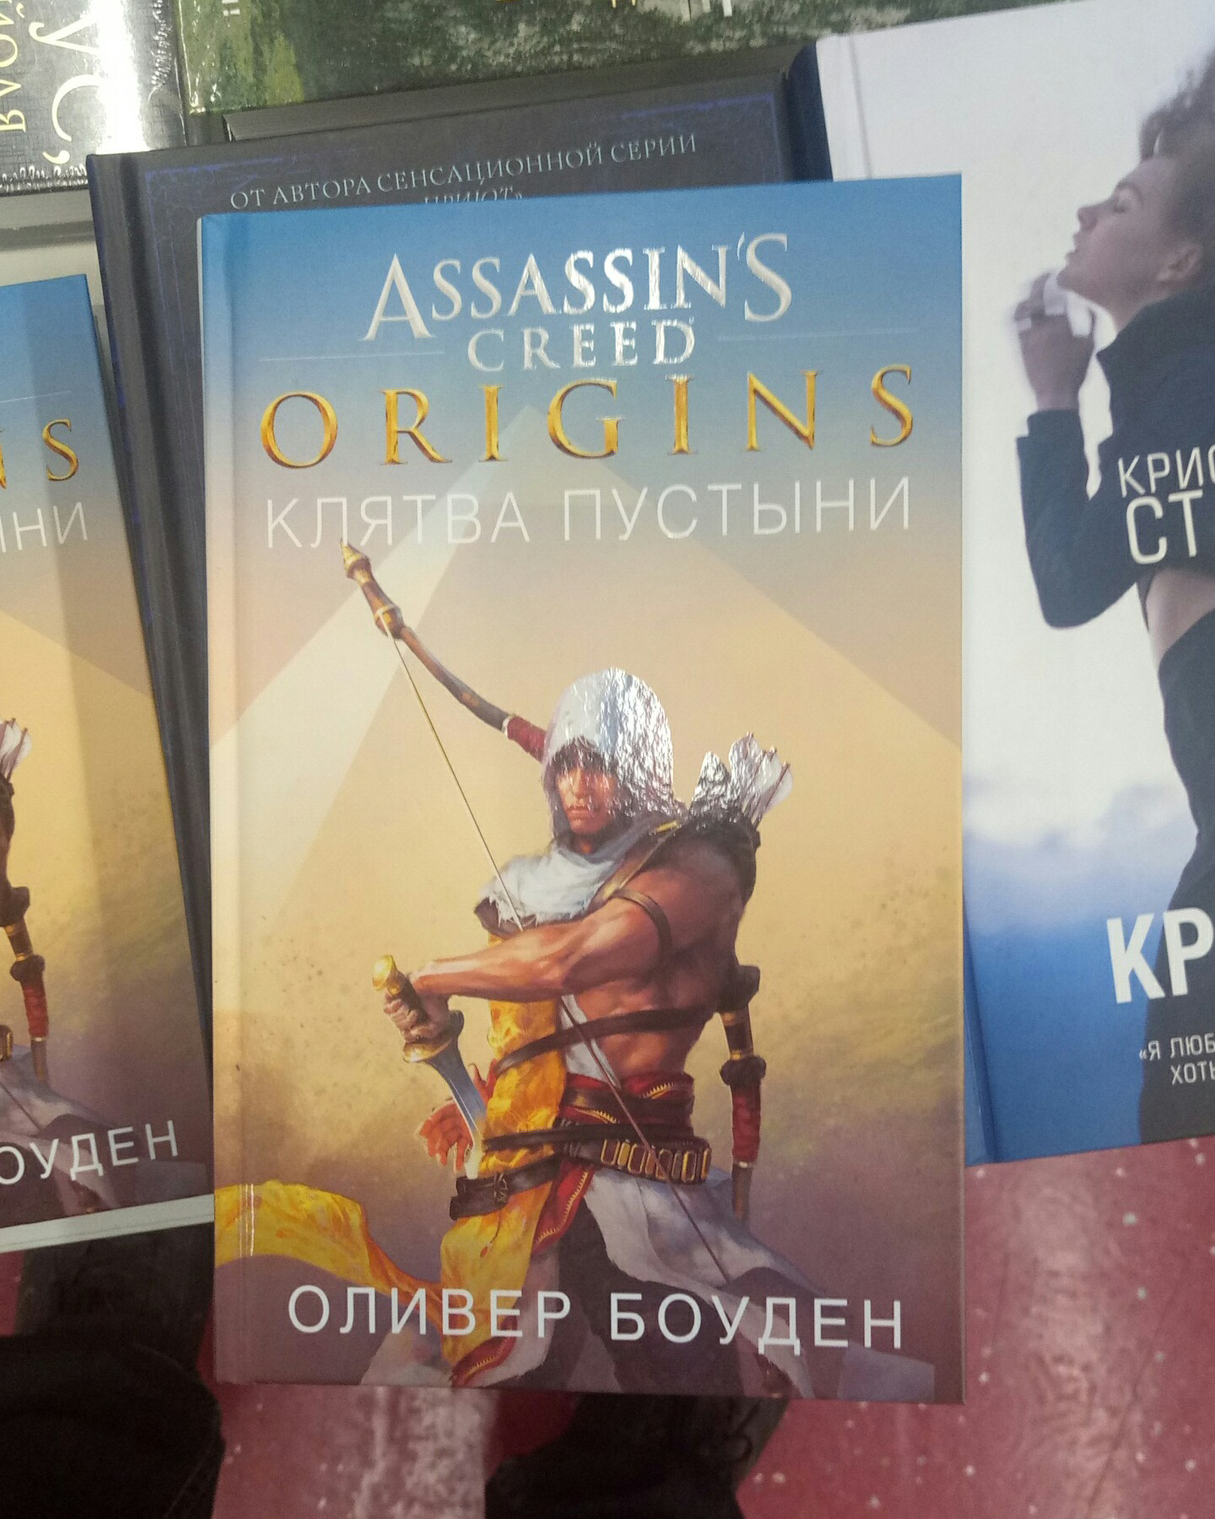 I saw Anchorite's book here in the store... - Fotozhaba, Fake, Photoshop master, Longpost, Anchorite, Ubisoft, Assassins creed, Games, Books, My